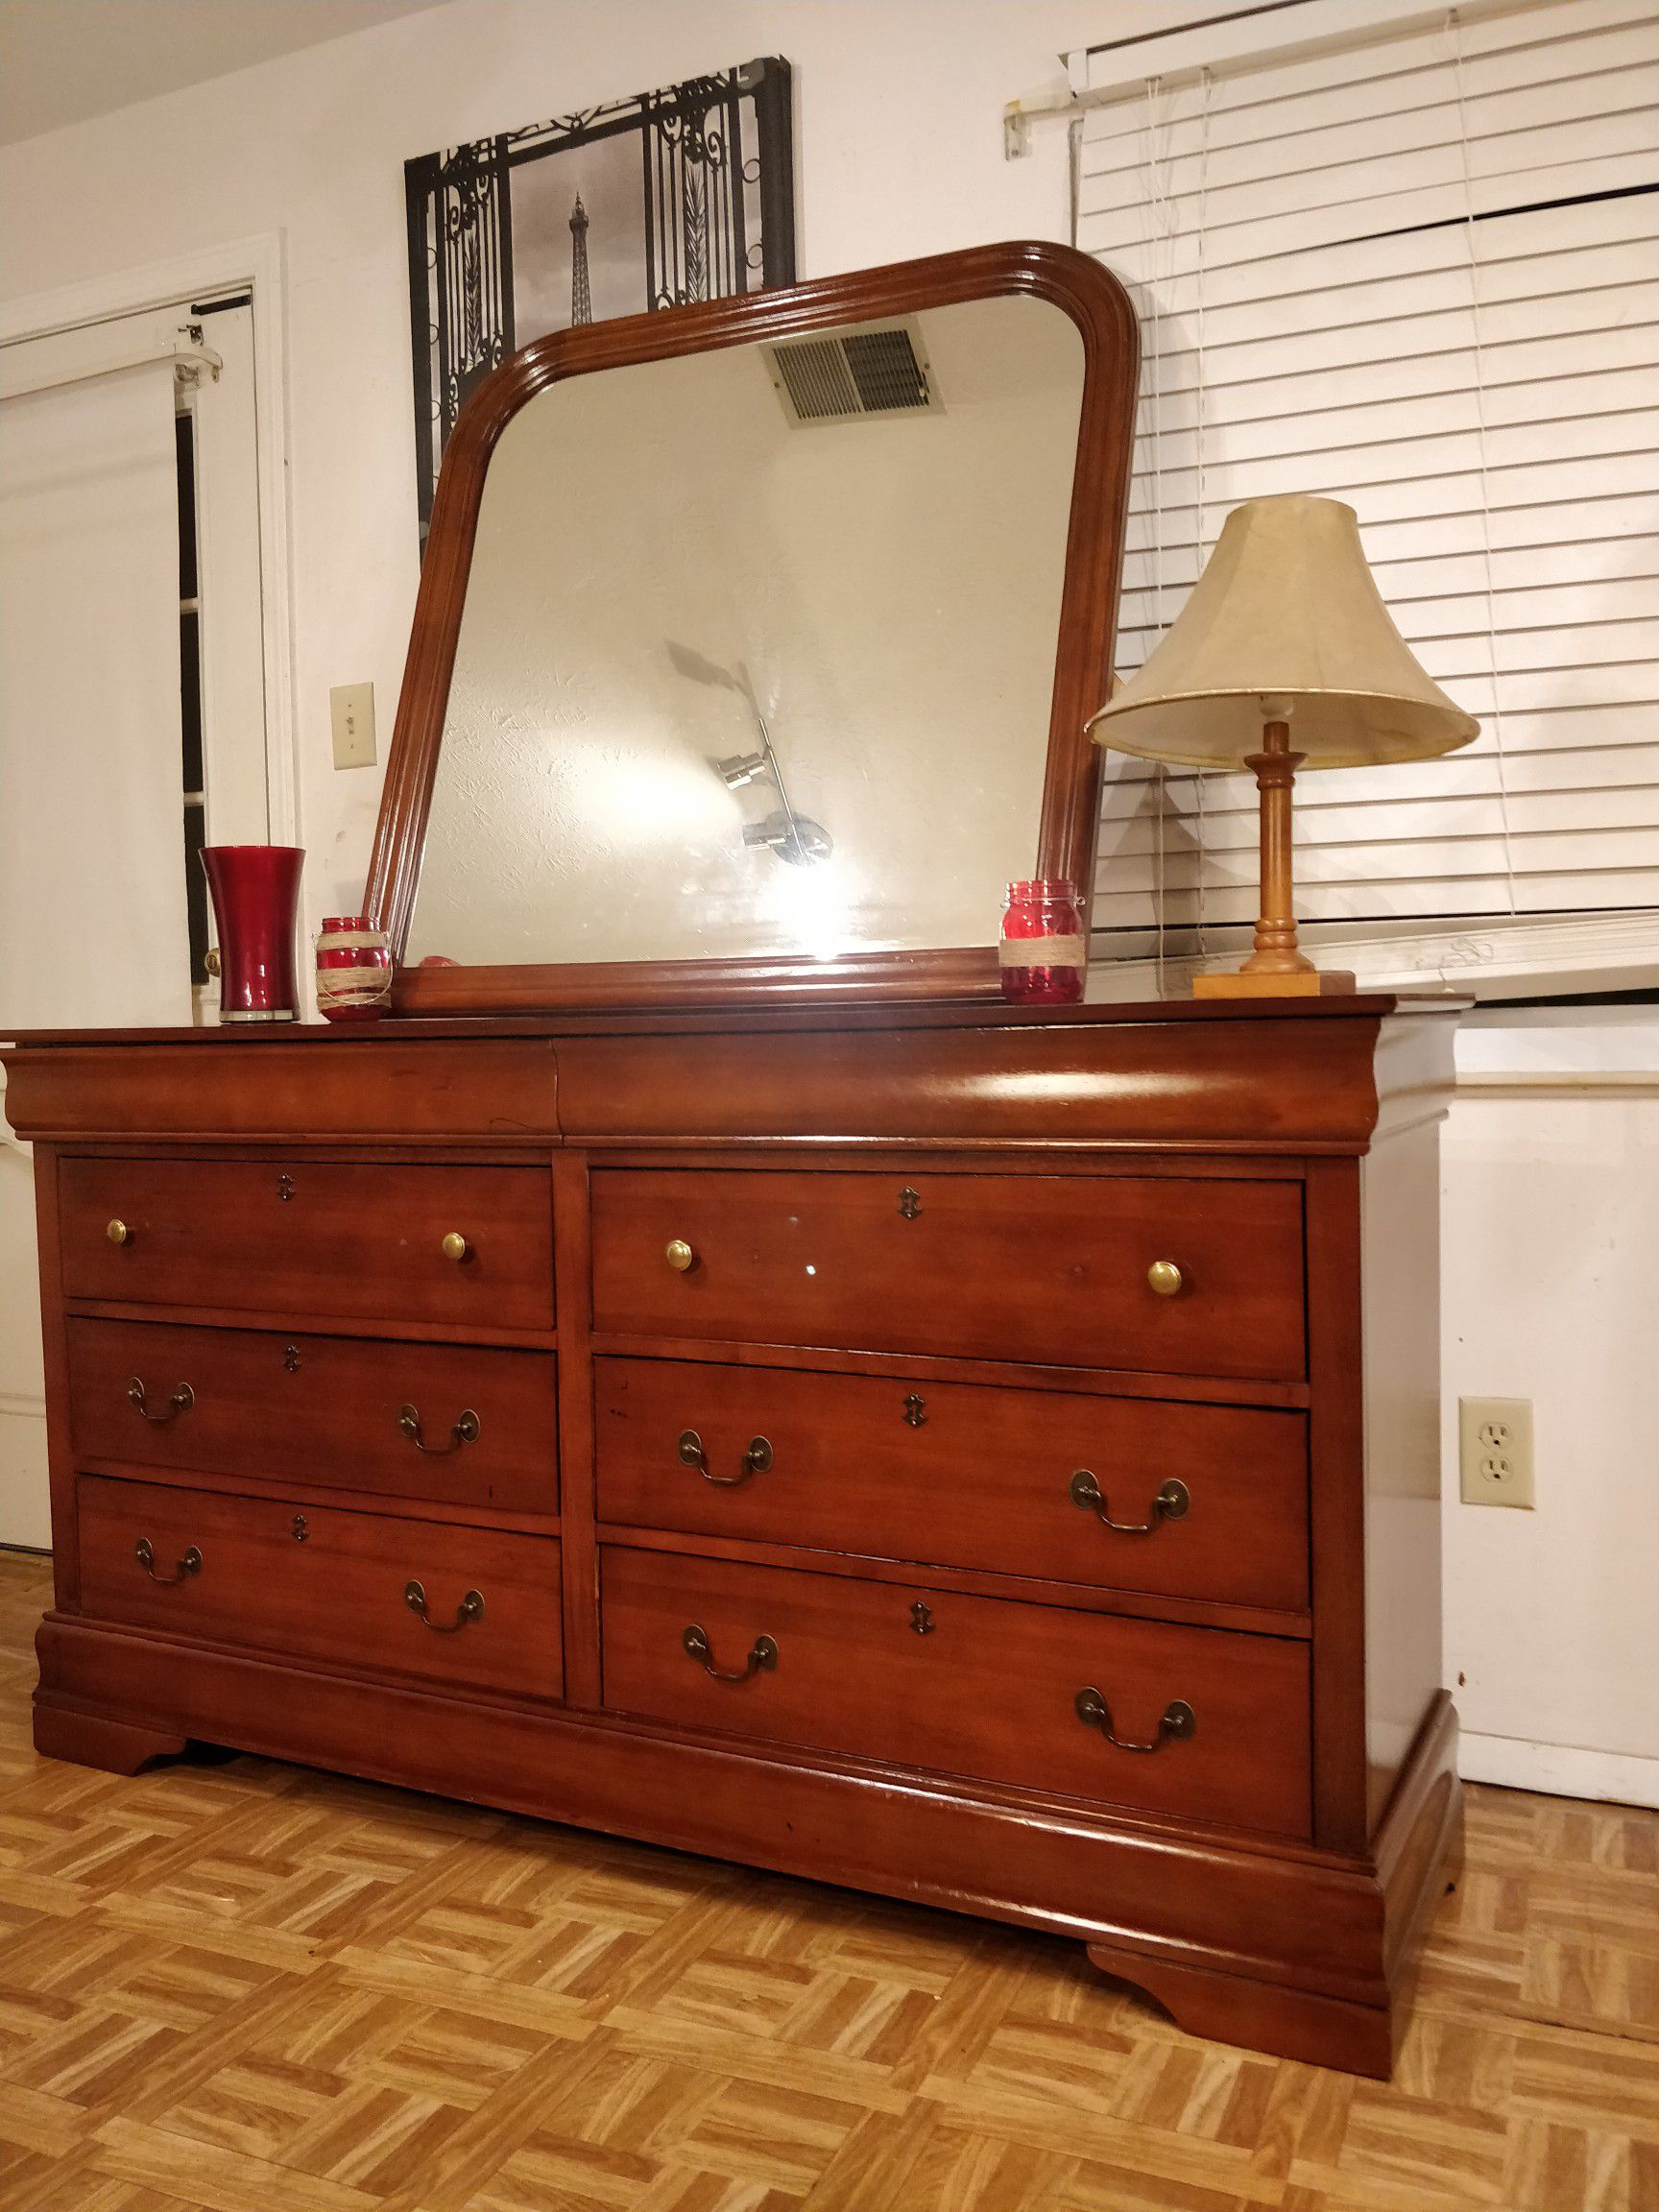 Wooden big dresser with 8 drawers and big mirror. L66"*W18"*H36"